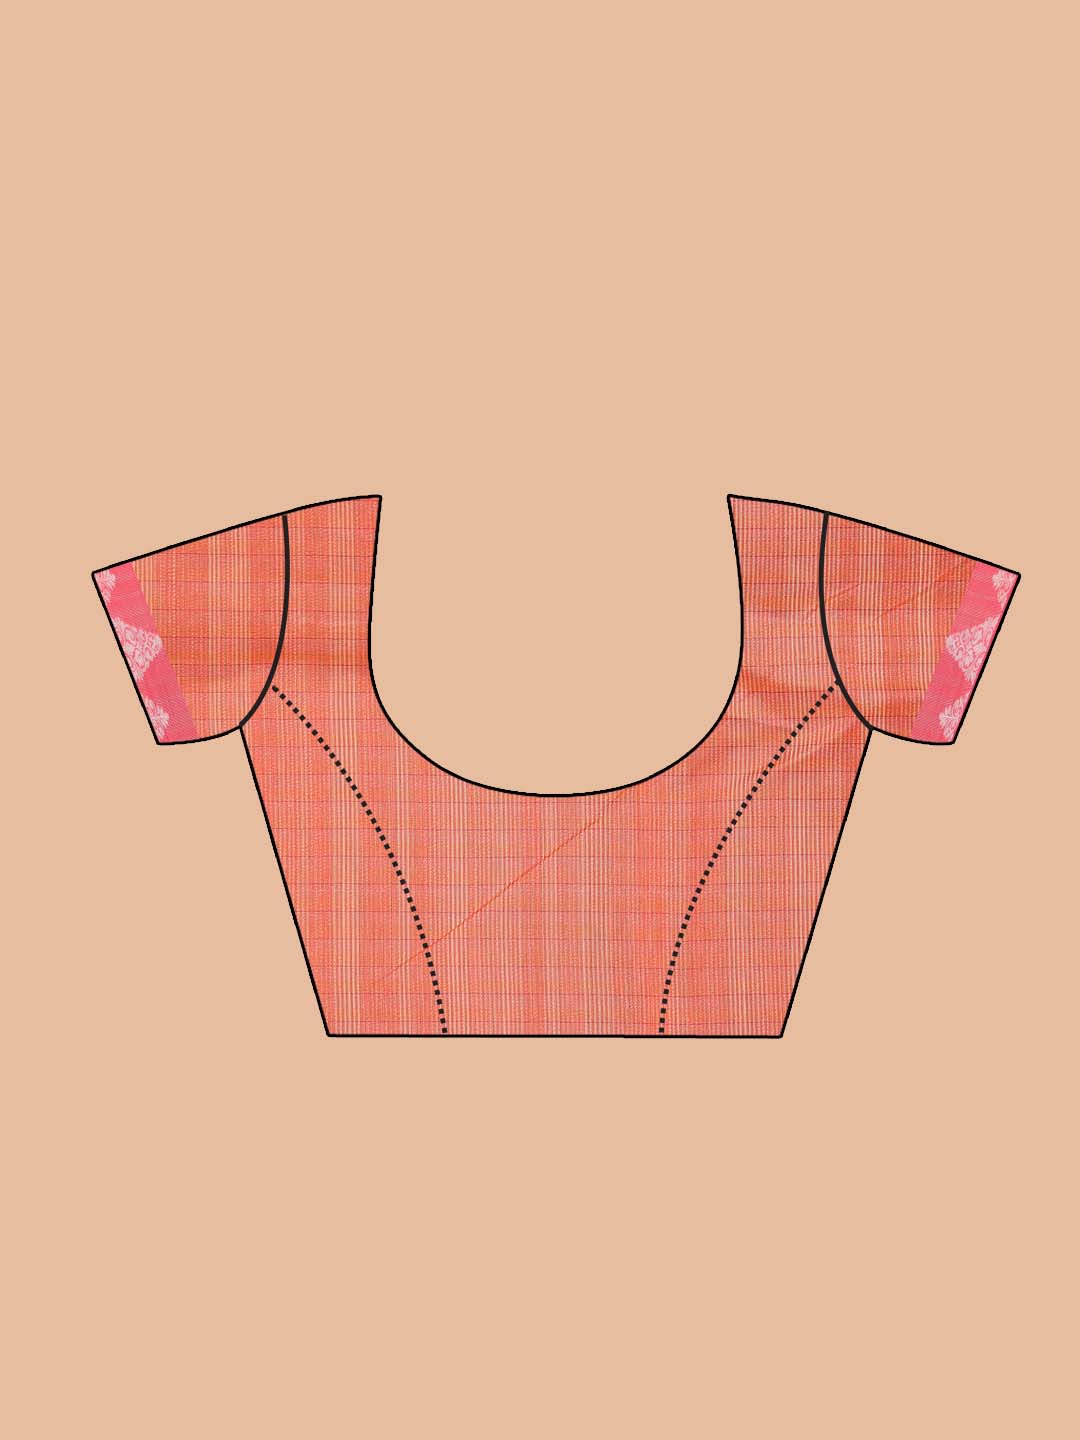 Indethnic Banarasi Peach Checked Daily Wear Saree - Blouse Piece View